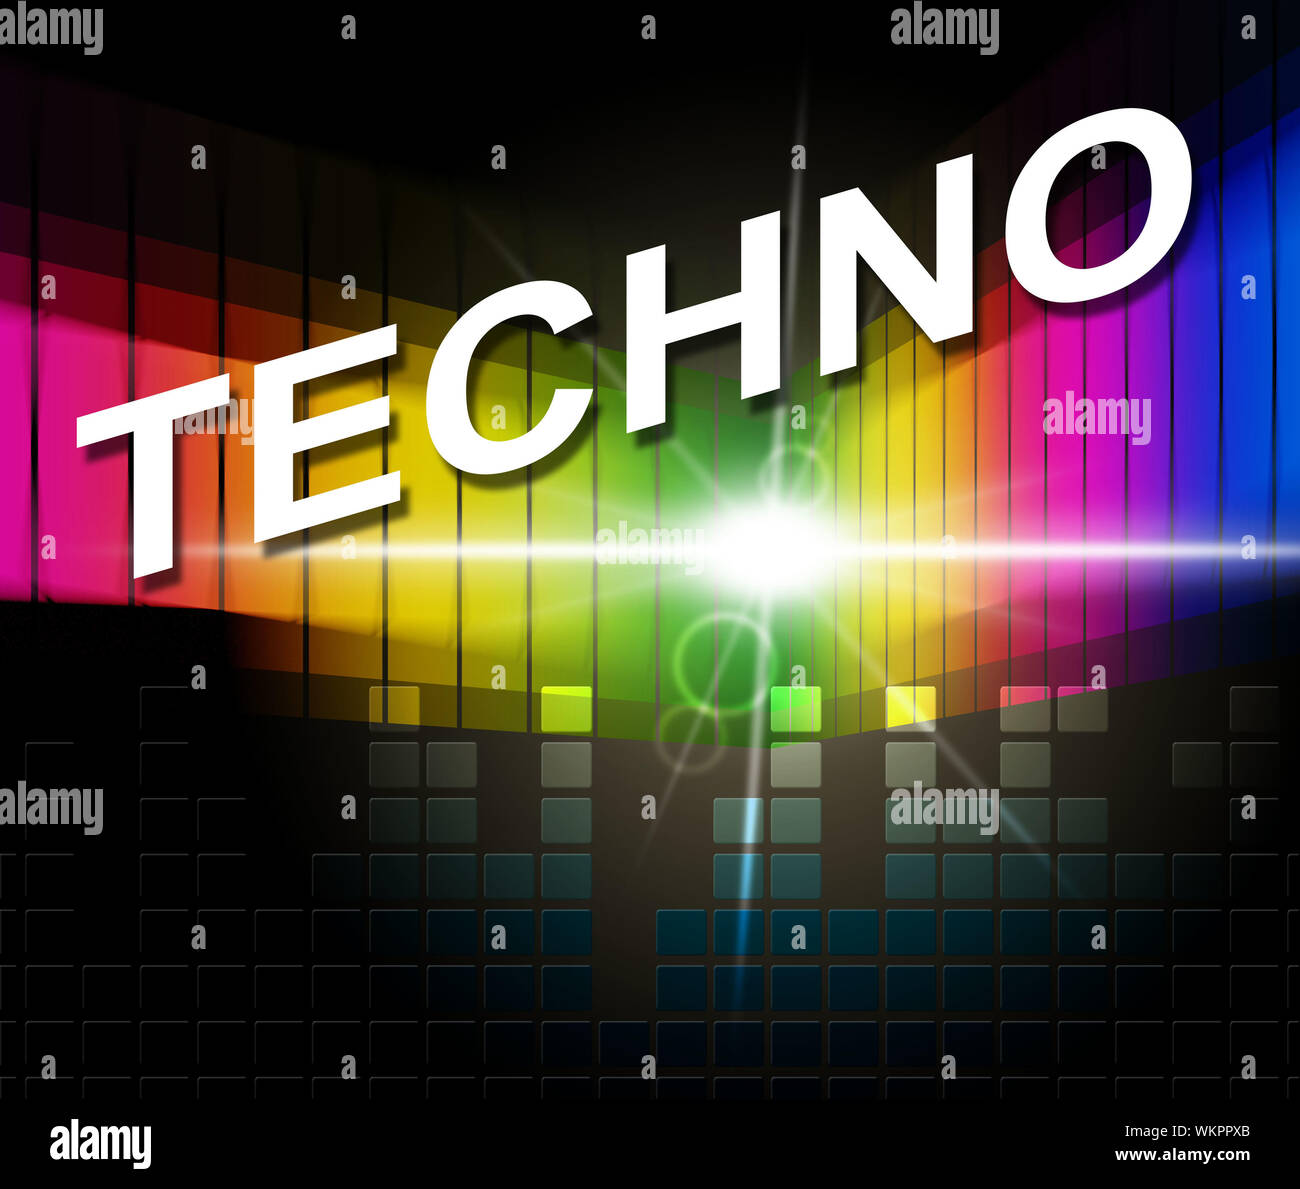 Techno Music Representing Disco Dancing And Acoustic Stock Photo